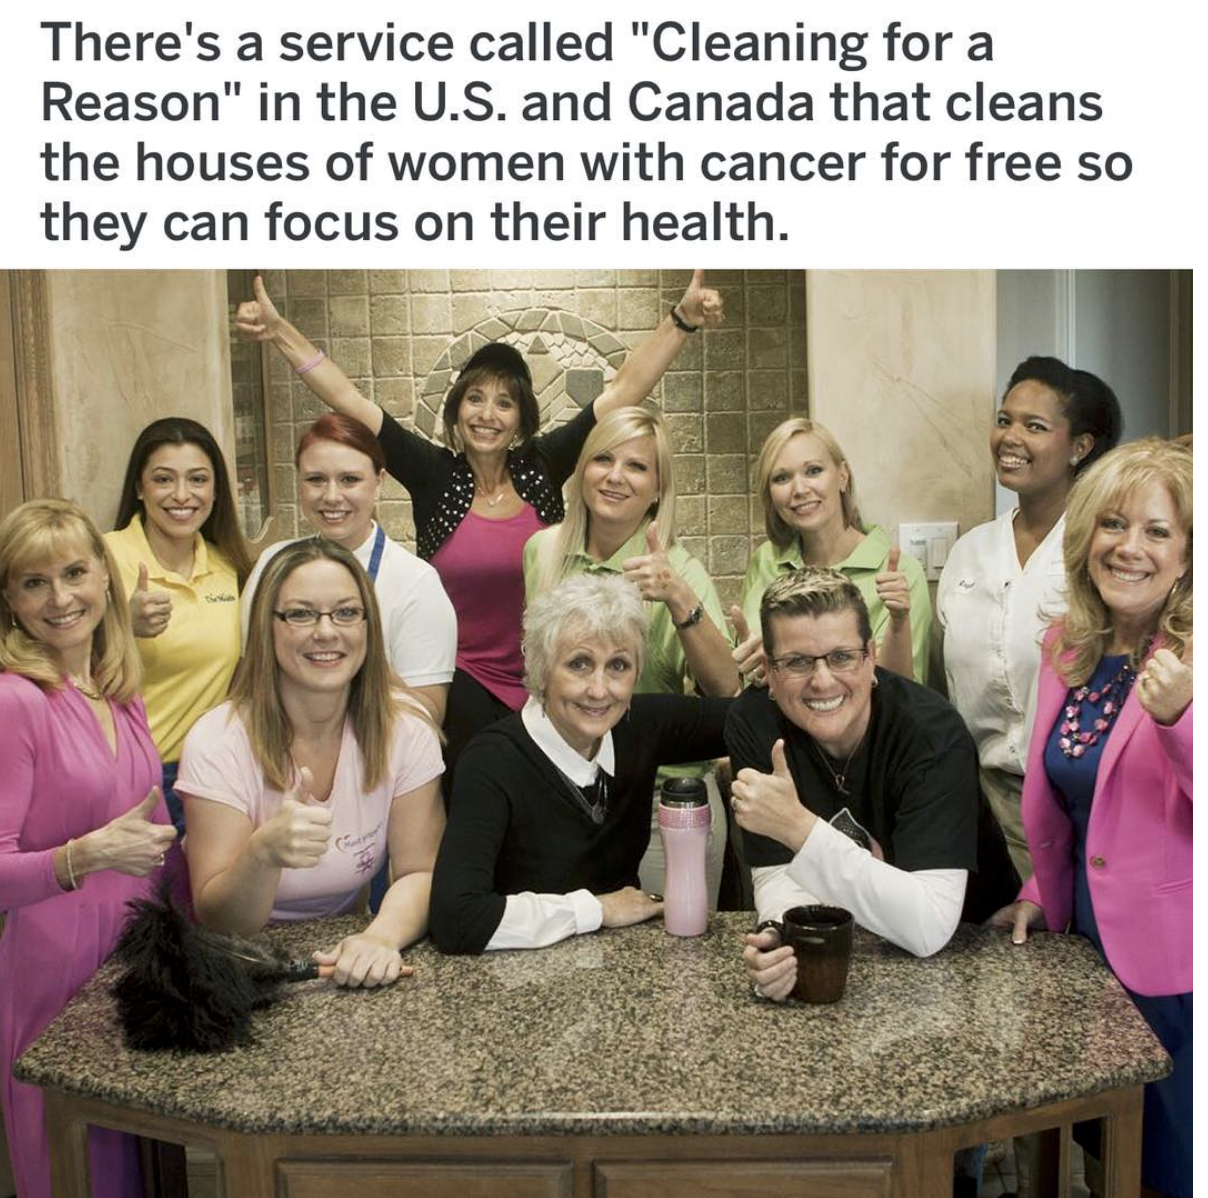 wholesome memes and pics - 4 women cleaners - There's a service called "Cleaning for a Reason" in the U.S. and Canada that cleans the houses of women with cancer for free so they can focus on their health.